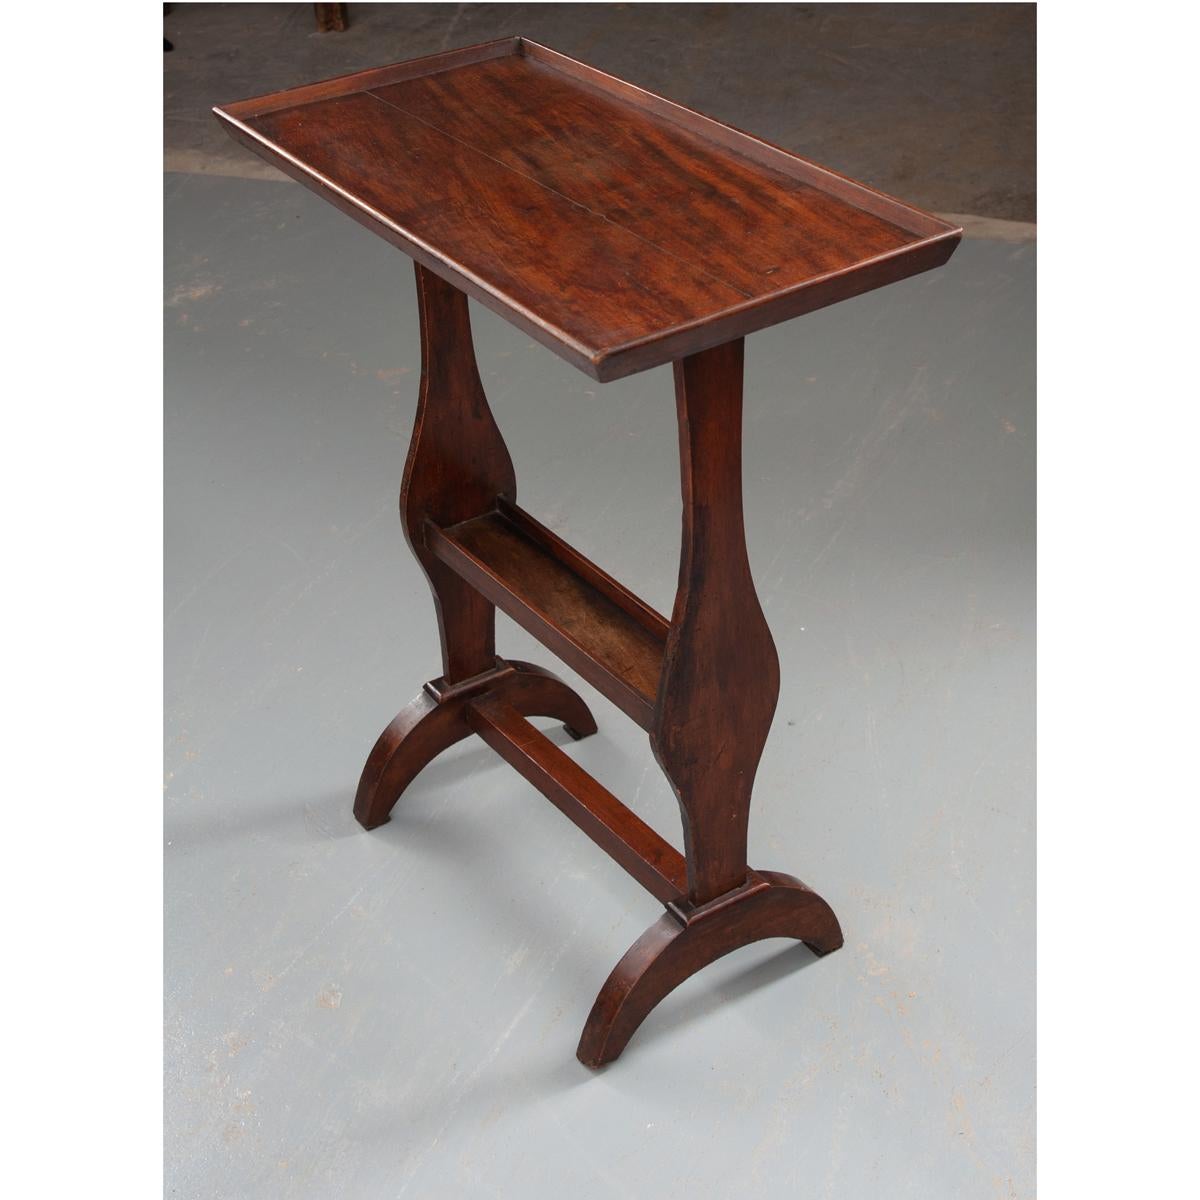 A rich, mahogany accent table from France. The rectangular table top has a beveled frame extending above the top’s surface, giving the top a tray-like appeal. This piece has shaped sides with a narrow, lower shelf, also with trim extending above the